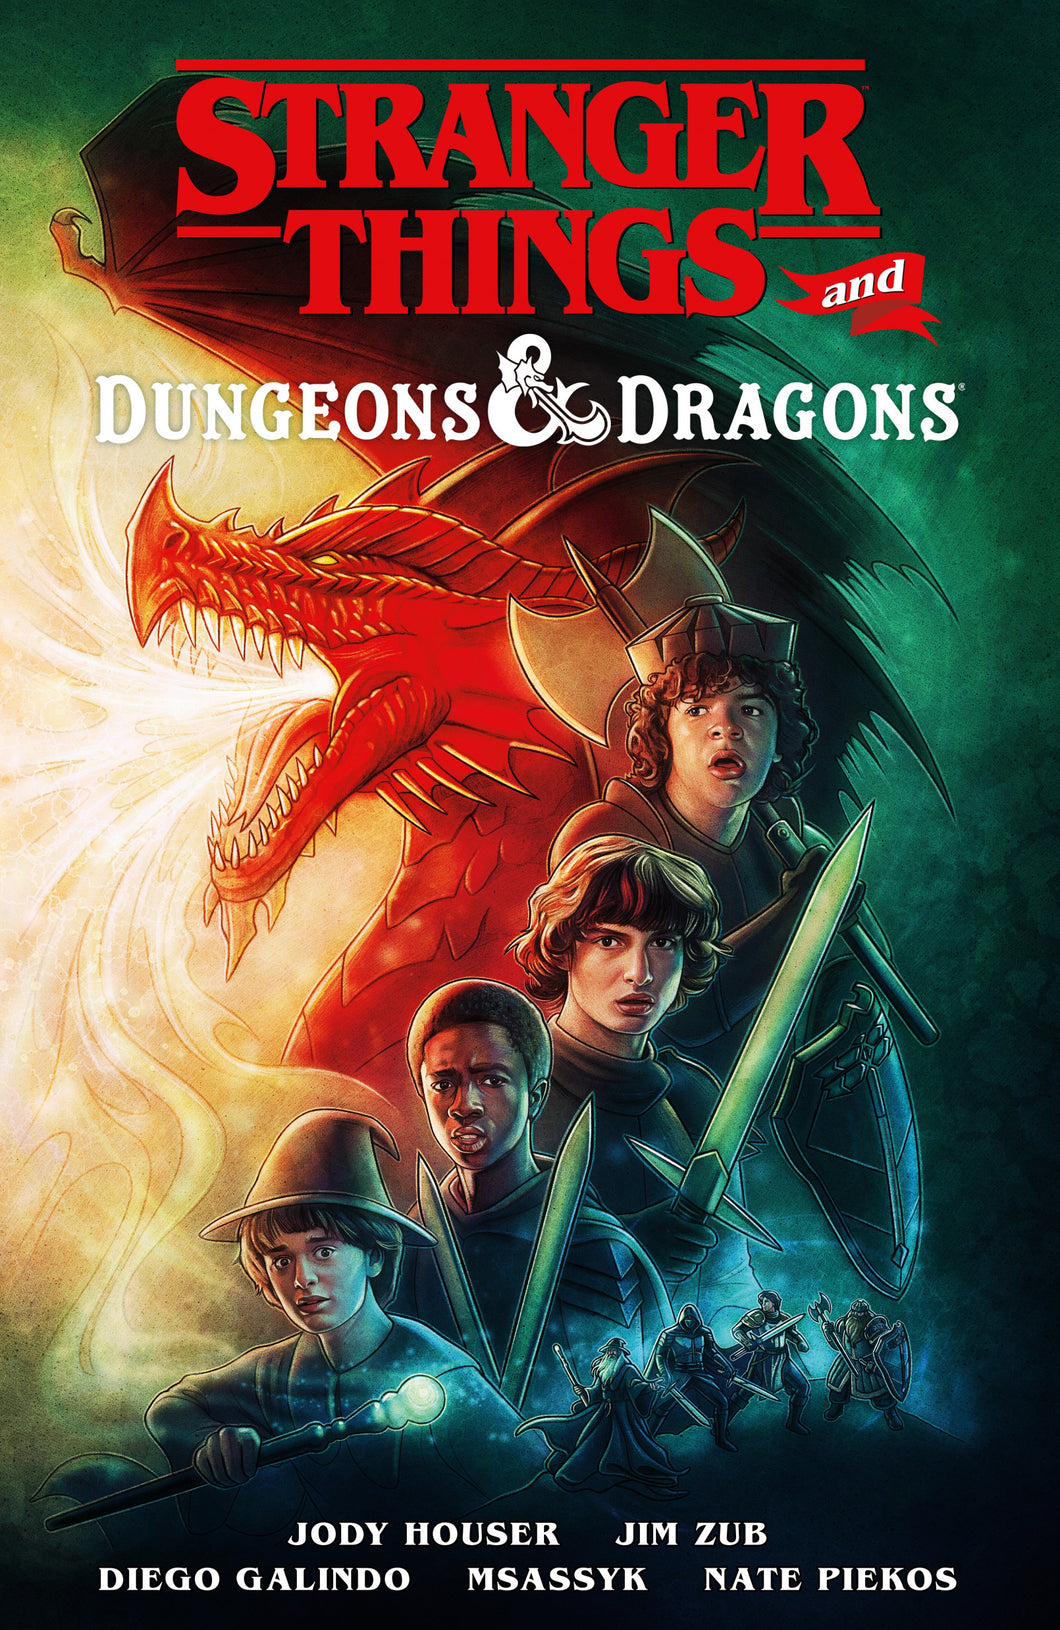 D&D Dungeons & Dragons and Stranger Things Comic Book